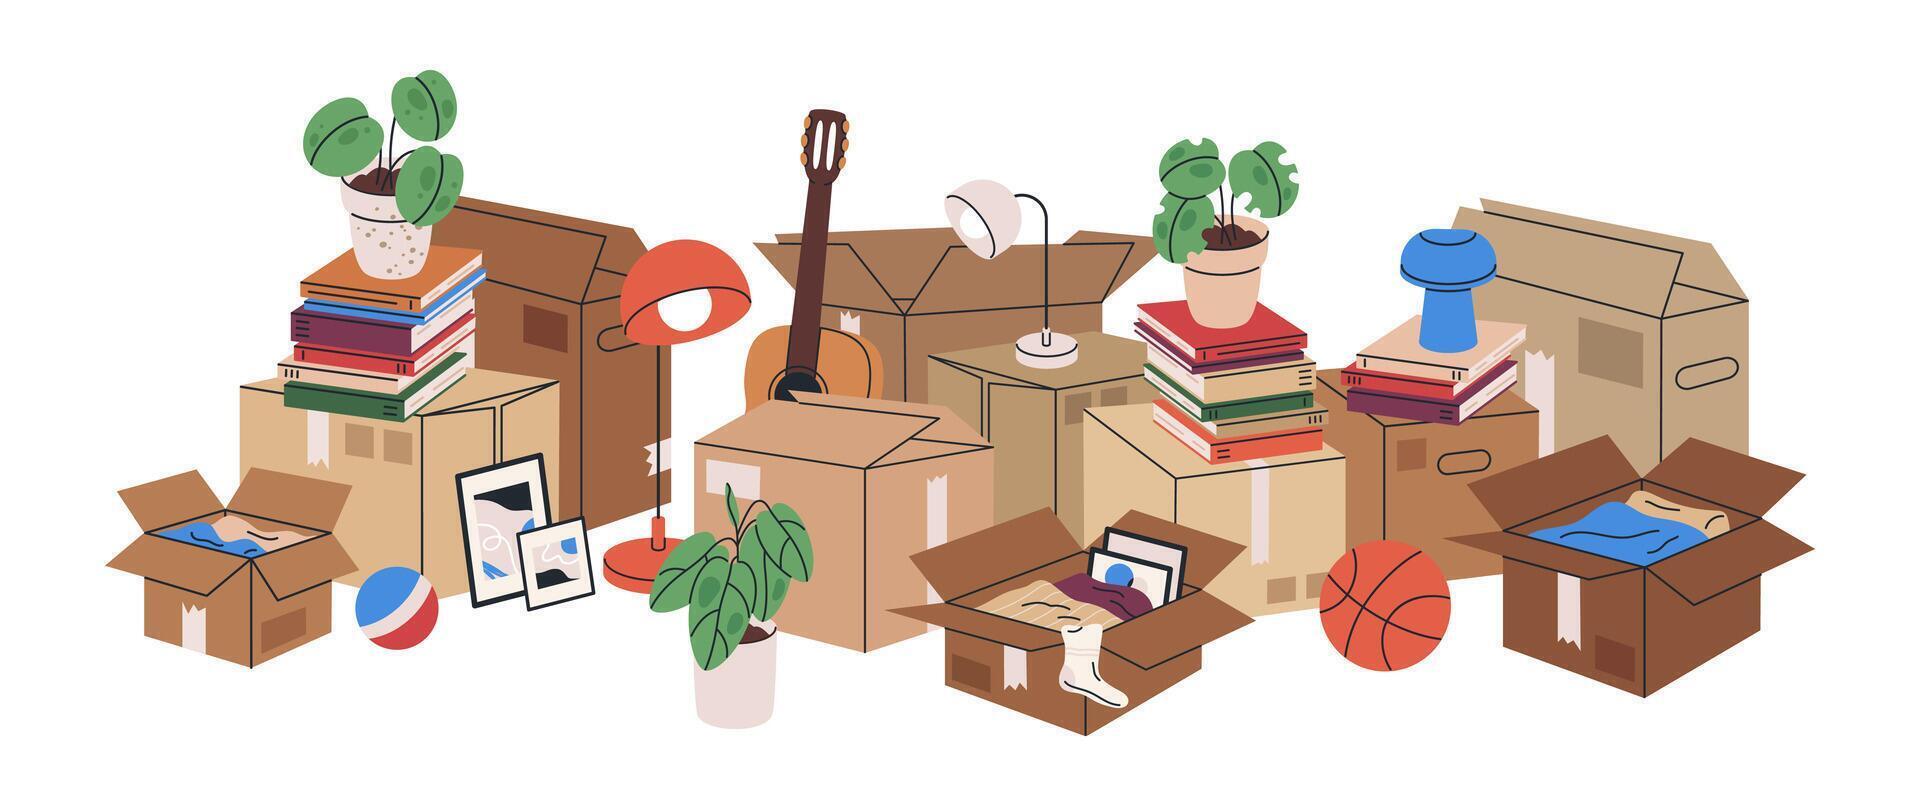 Moving stuff in cardboard boxes. Stacked carton moving boxes with books, clothes and pot plants flat background illustration. New house moving boxes on white vector